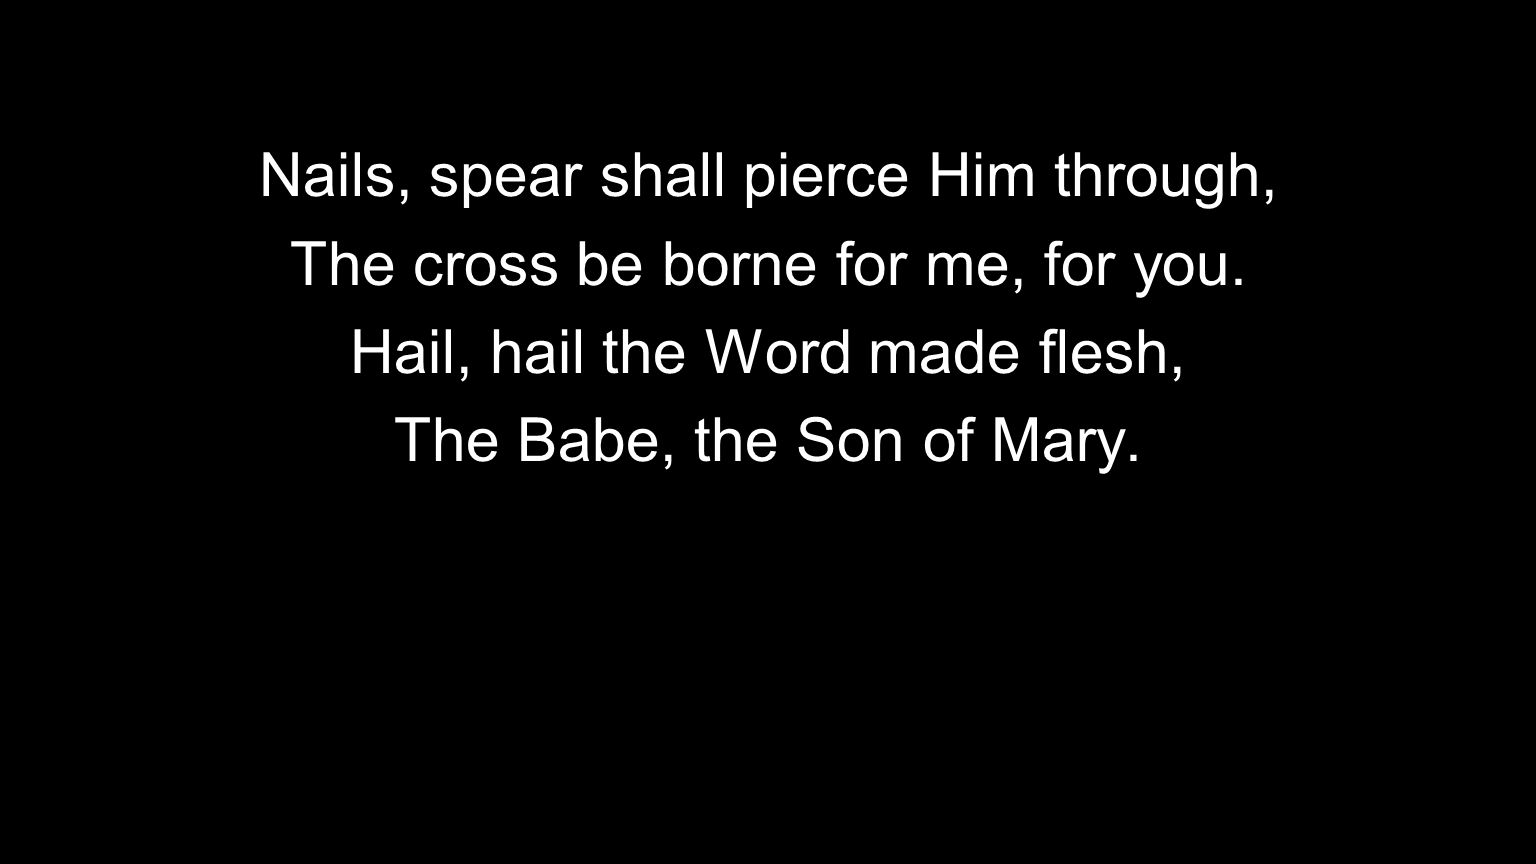 Nails, spear shall pierce Him through, The cross be borne for me, for you.